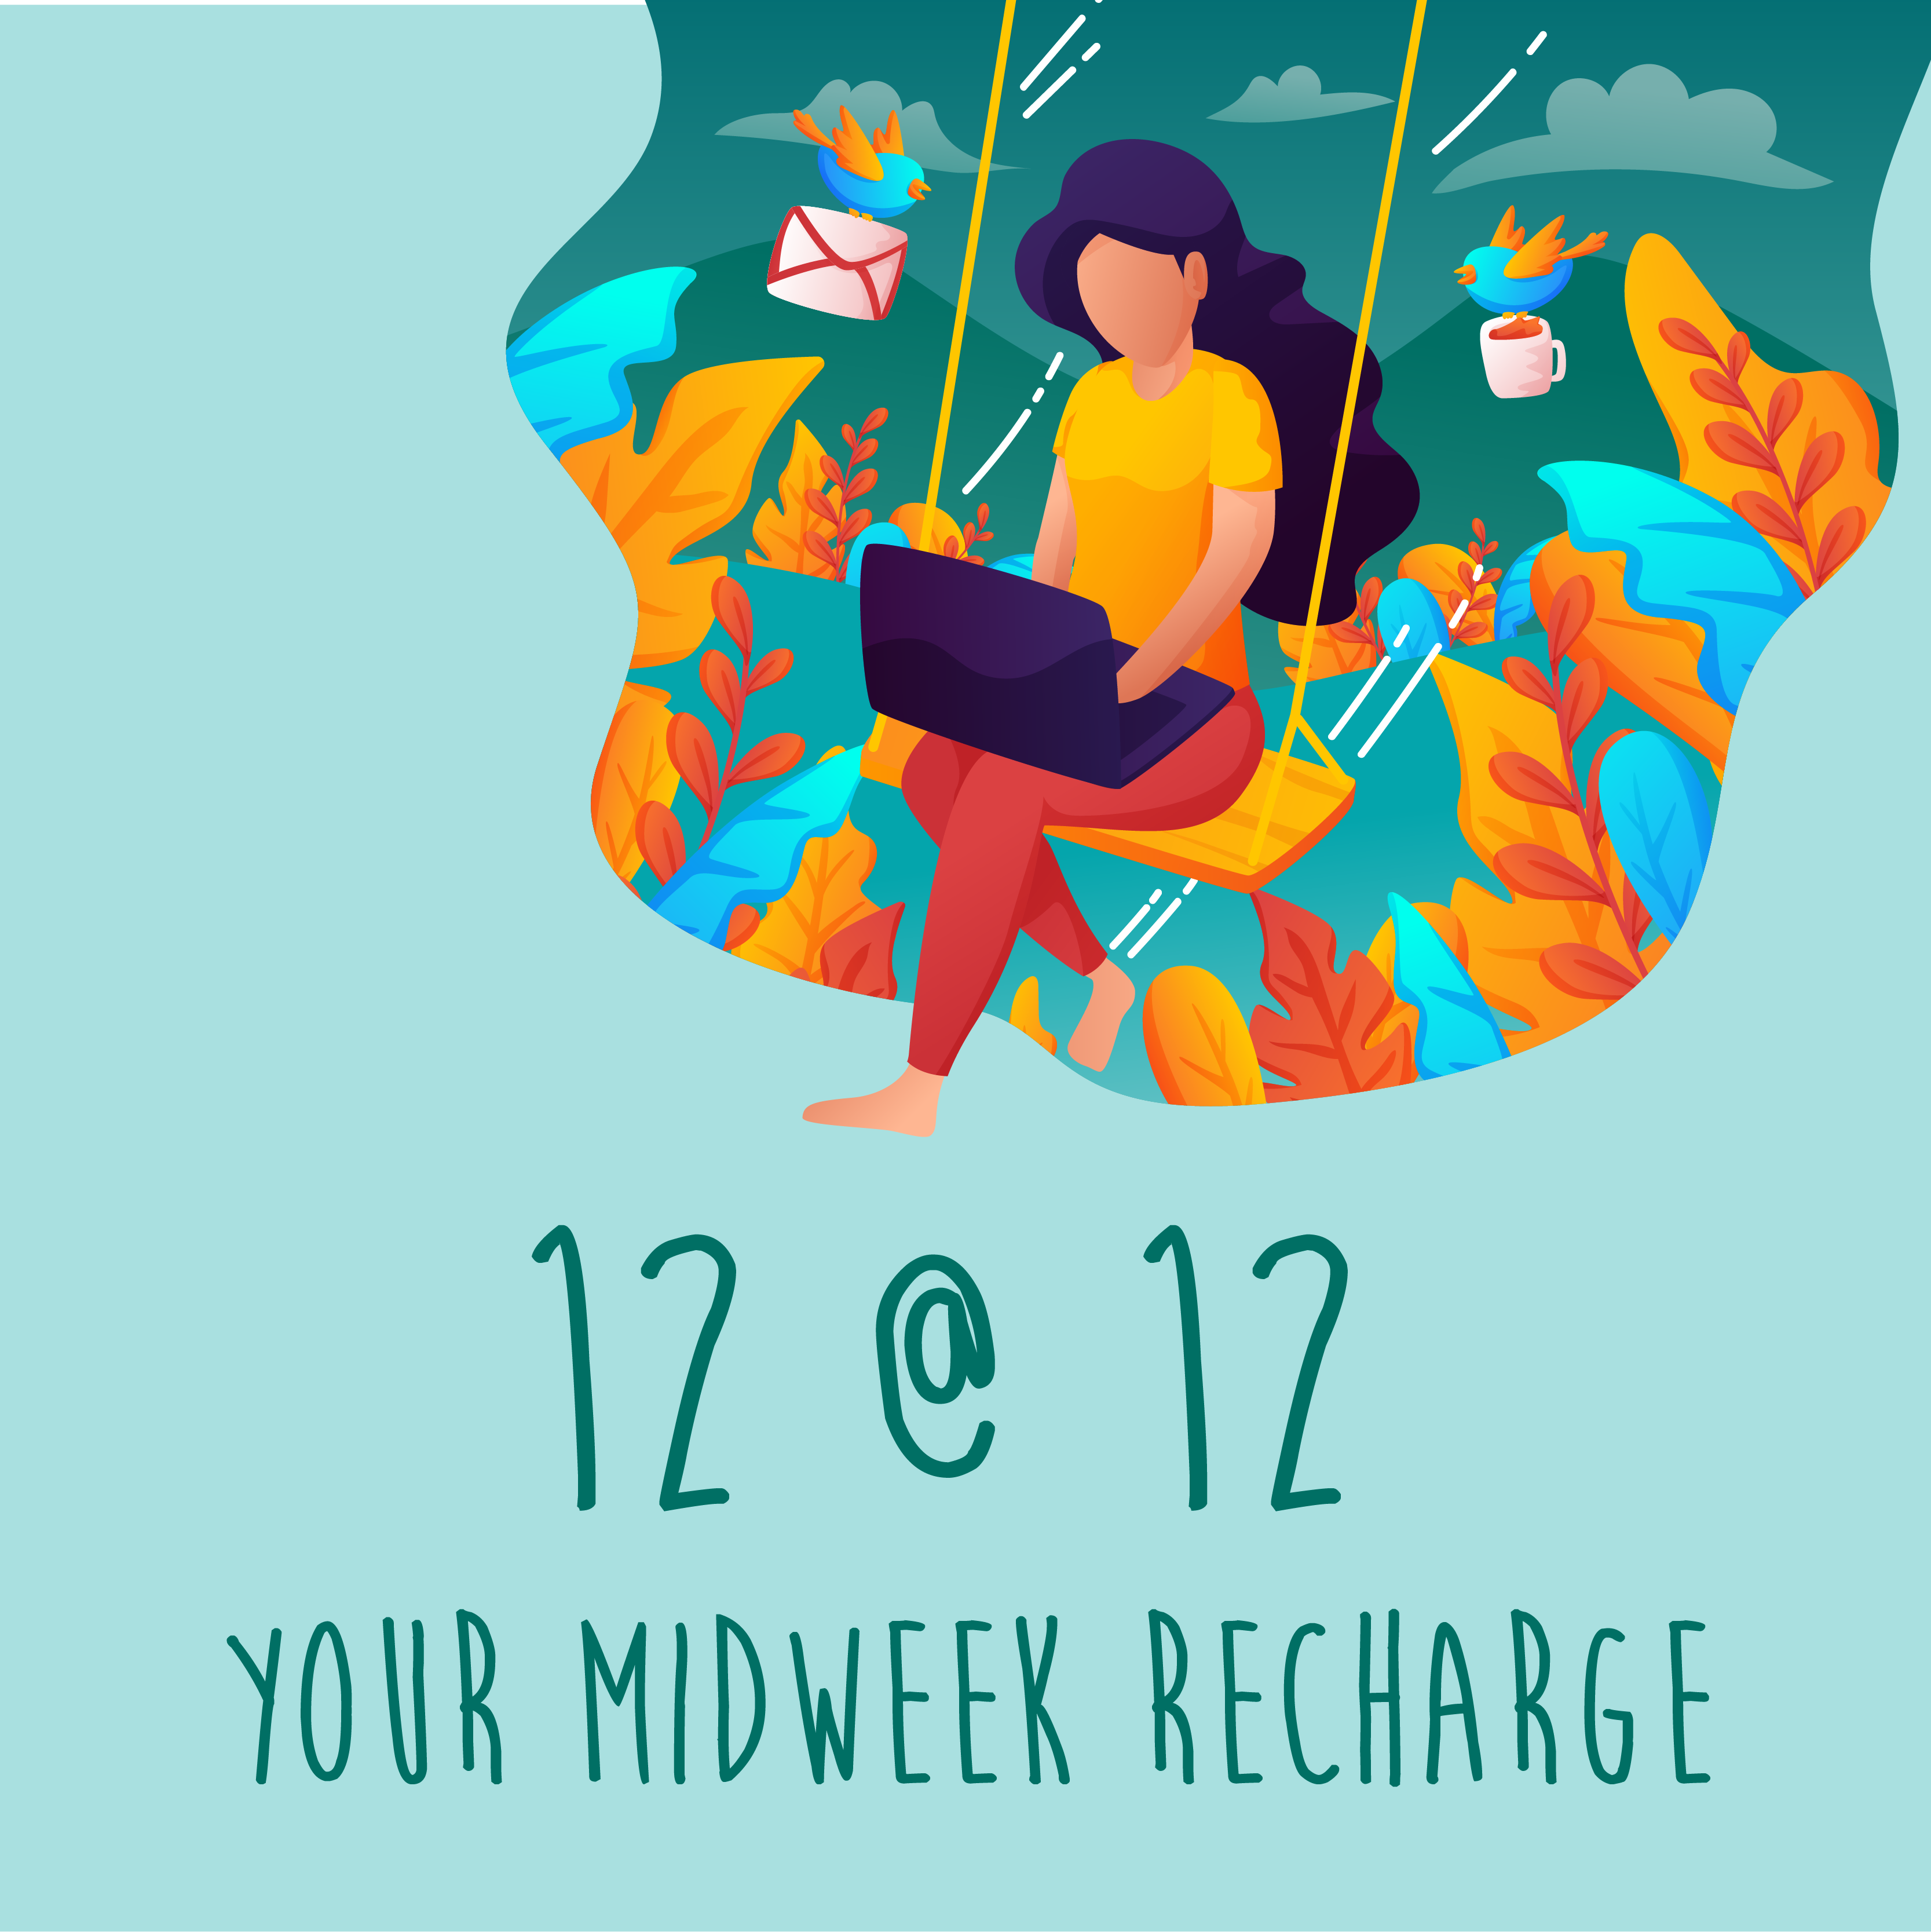 12@12 your mid week recharge